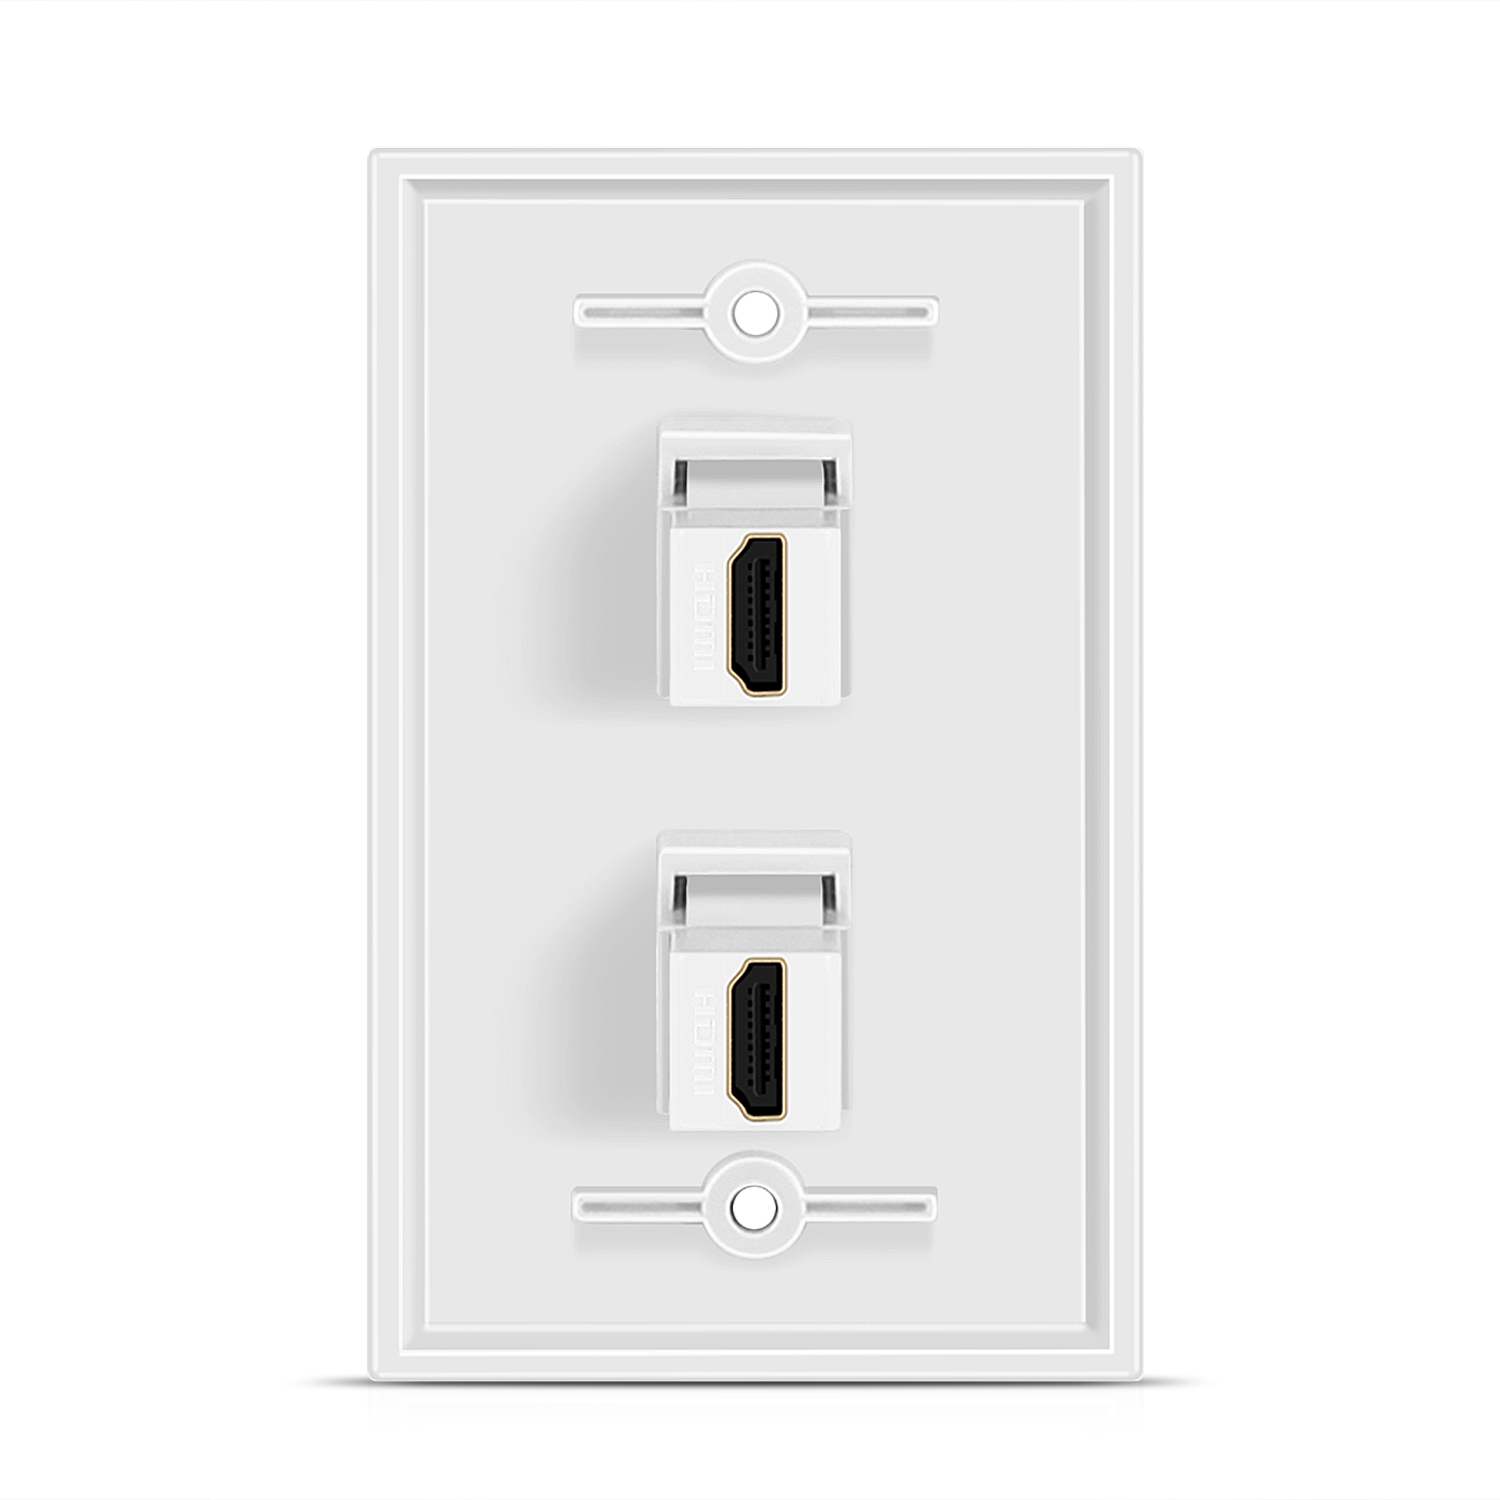 HDMI Extention Wall Plate - Features pass-thru for High Speed HDMI features such as HDMI Audio Return Channel (ARC/eARC), HDMI Ethernet Channel (HEC), 48 bit color depth, 32 channel audio, Dolby True HD 7.1 audio and bandwidth up to 18 Gbps; Standard sized 4.5 x 2.7 inch wall plates can be mounted with a 1-gang low voltage bracket